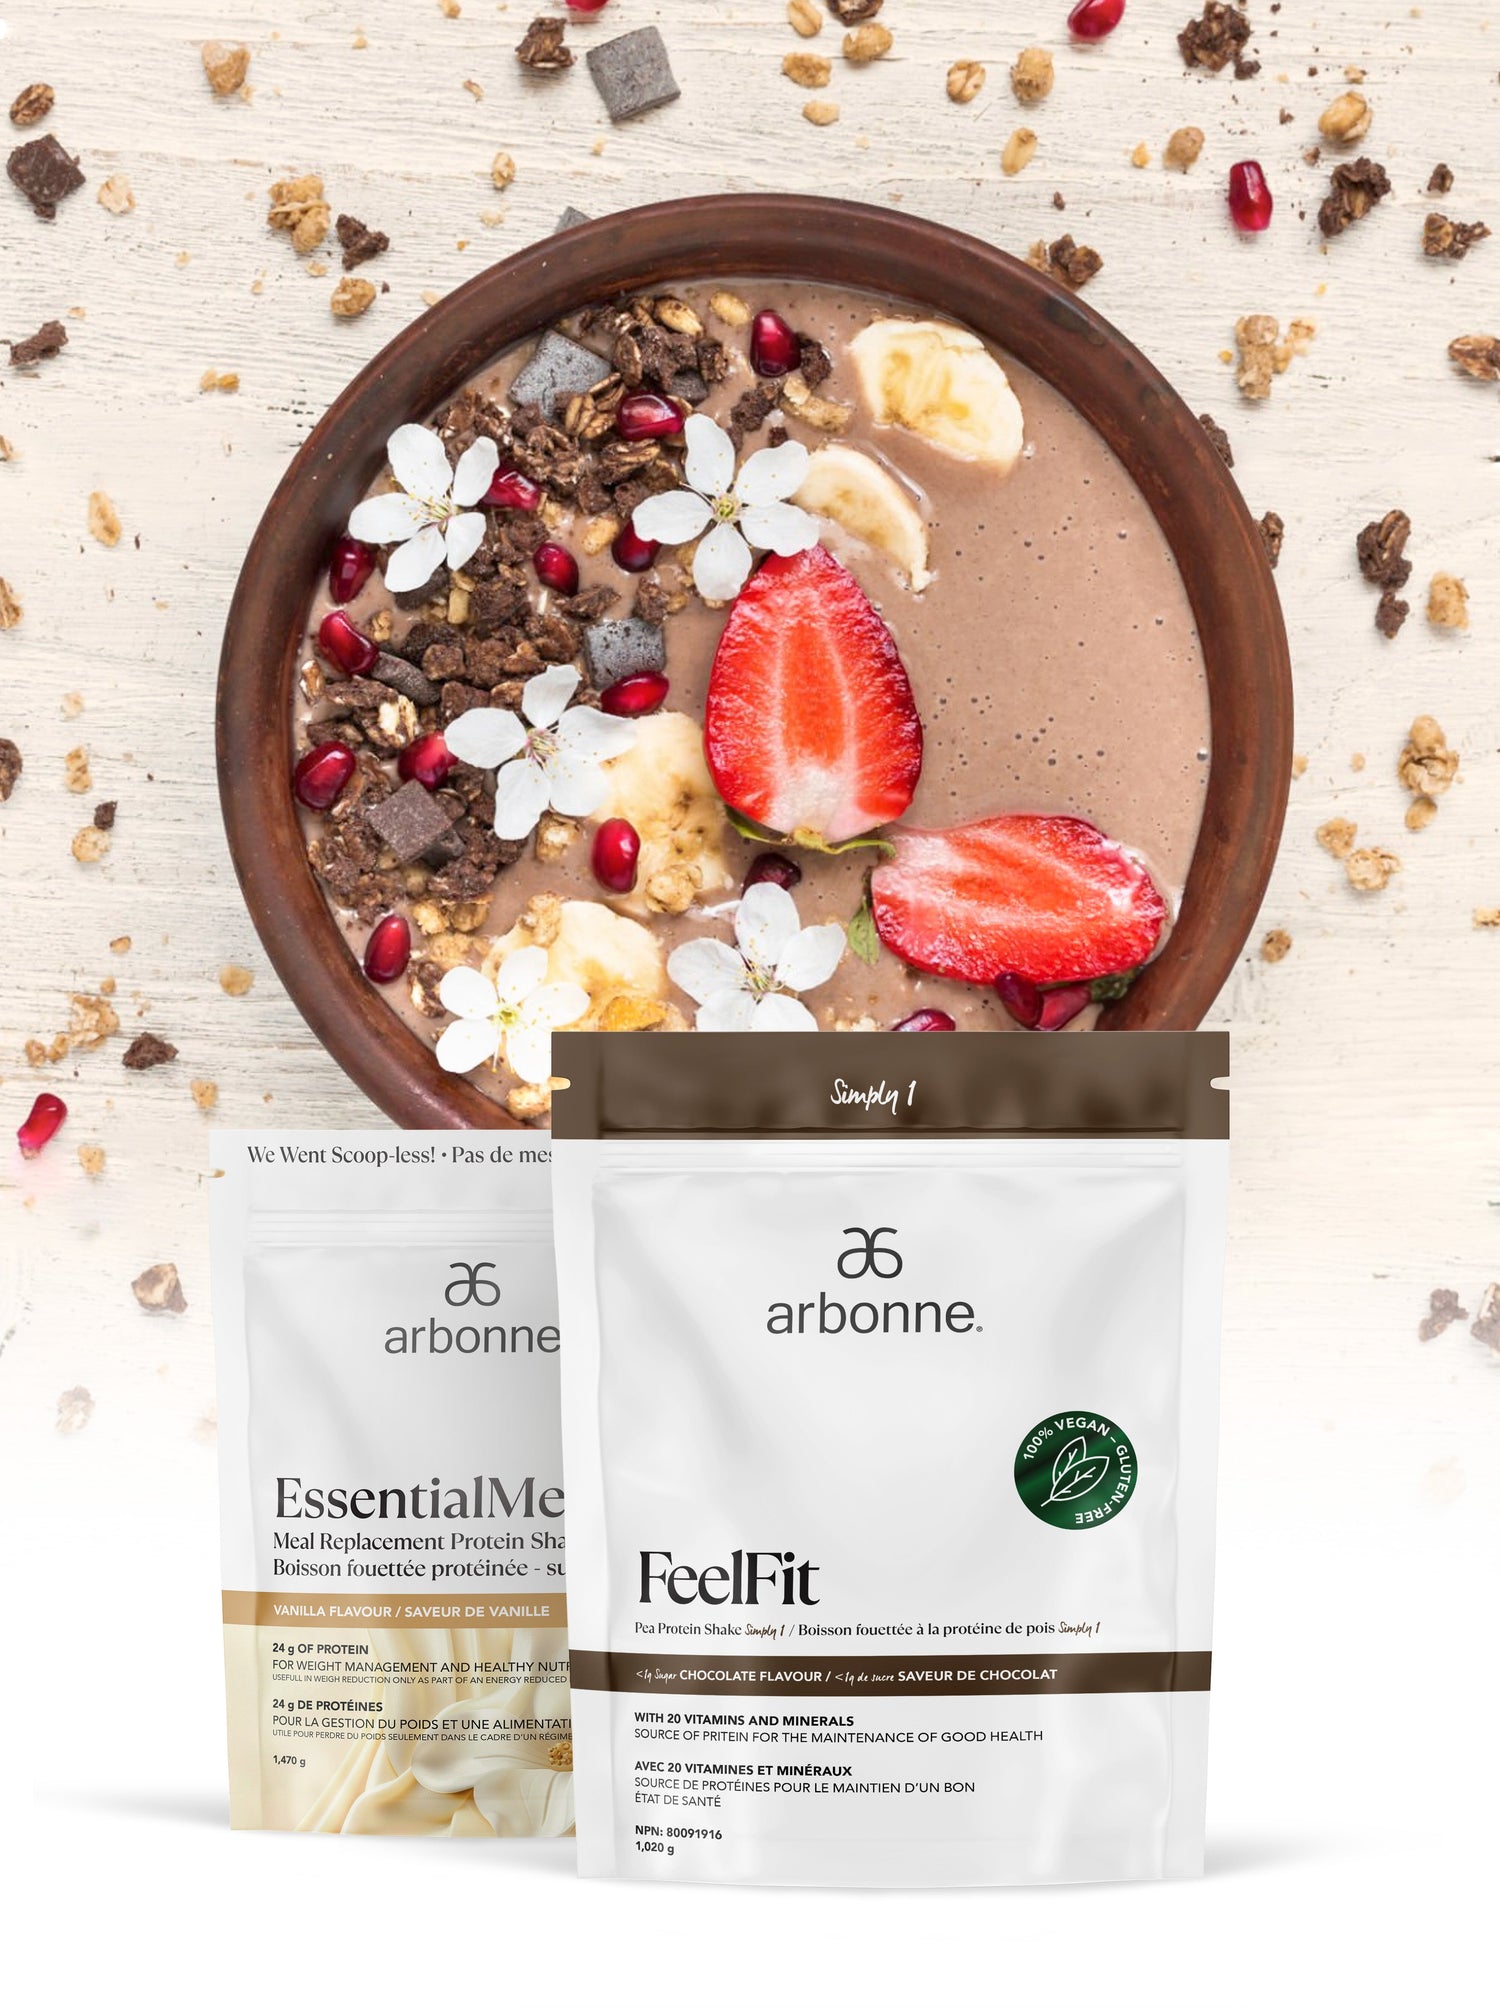 FeelFit Protein and EssentialMeal Protein from Arbonne